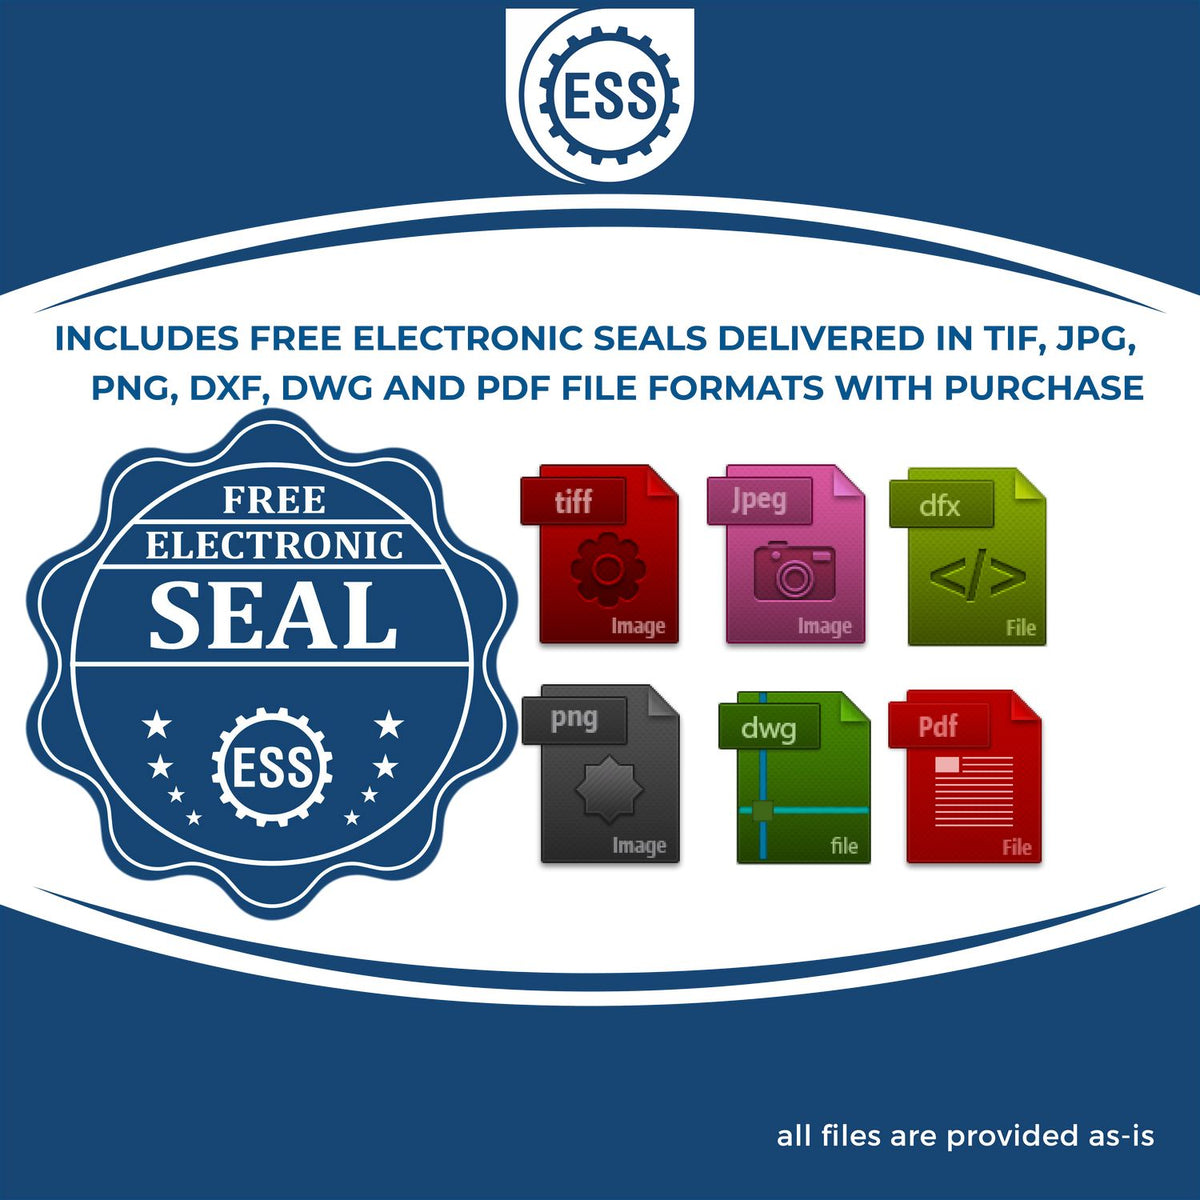 An infographic for the free electronic seal for the Alabama Desk Architect Embossing Seal illustrating the different file type icons such as DXF, DWG, TIF, JPG and PNG.